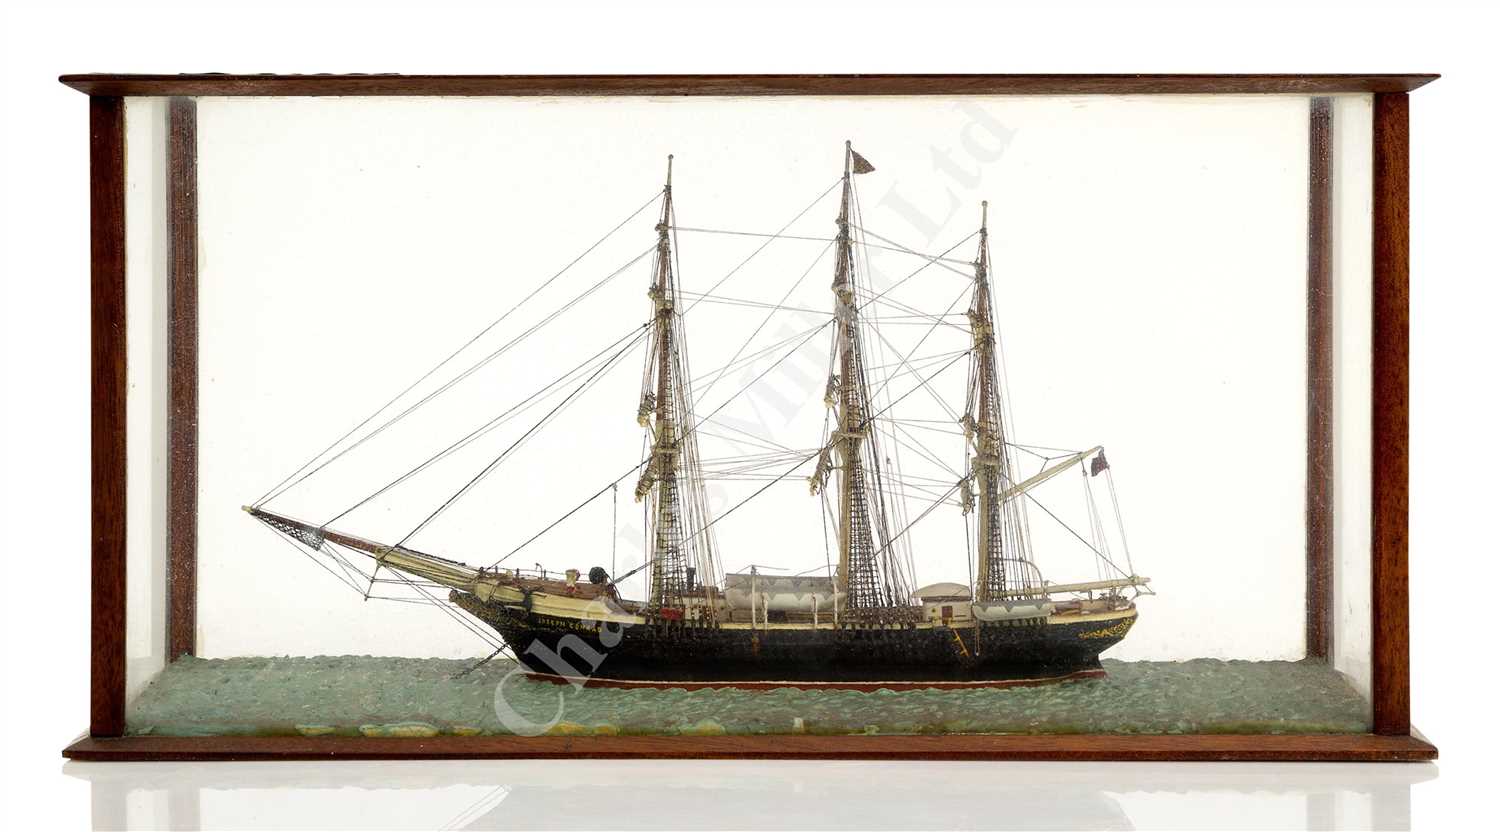 Lot 316 - AN HISTORICALLY INTERESTING SAILOR'S WATERLINE MODEL OF THE SAIL TRAINING SHIP JOSEPH CONRAD, MODELLED DURING HER CIRCUMNAVIGATION, CIRCA 1935